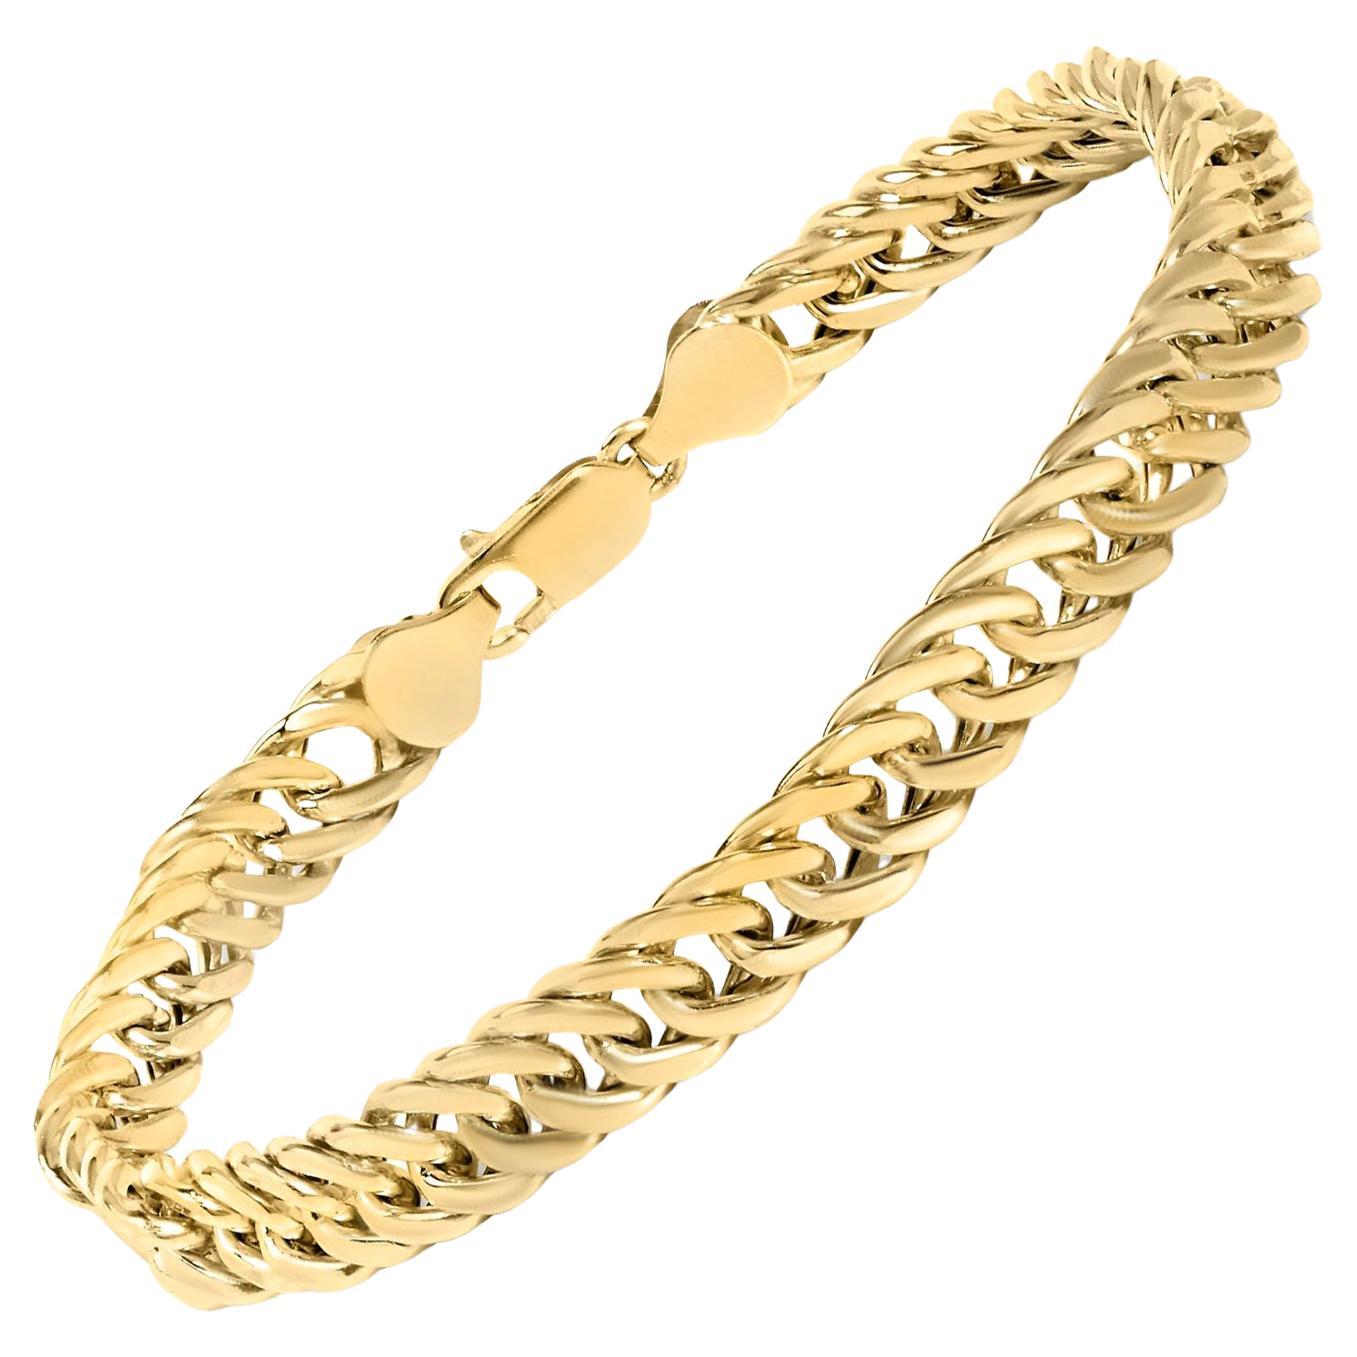 Cuban Link Bracelet 10K Yellow Gold 8.5 Inches